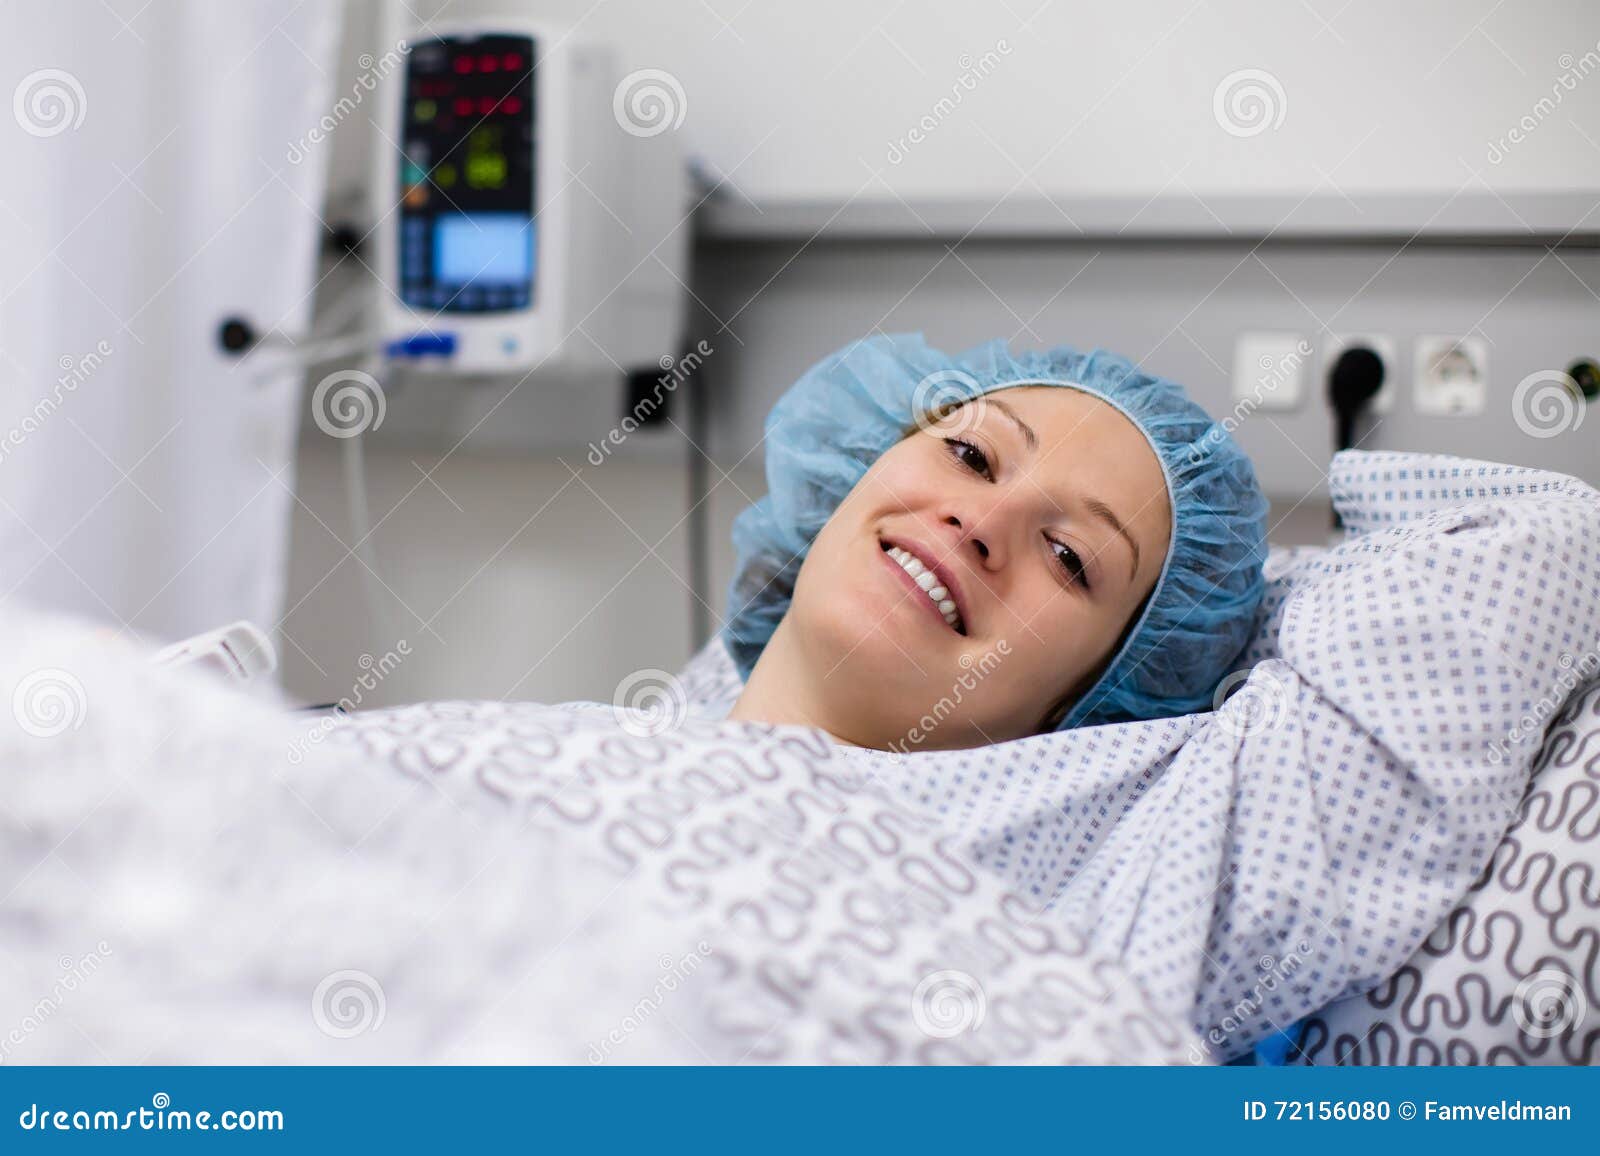 young woman in hospital recovery room after surgery